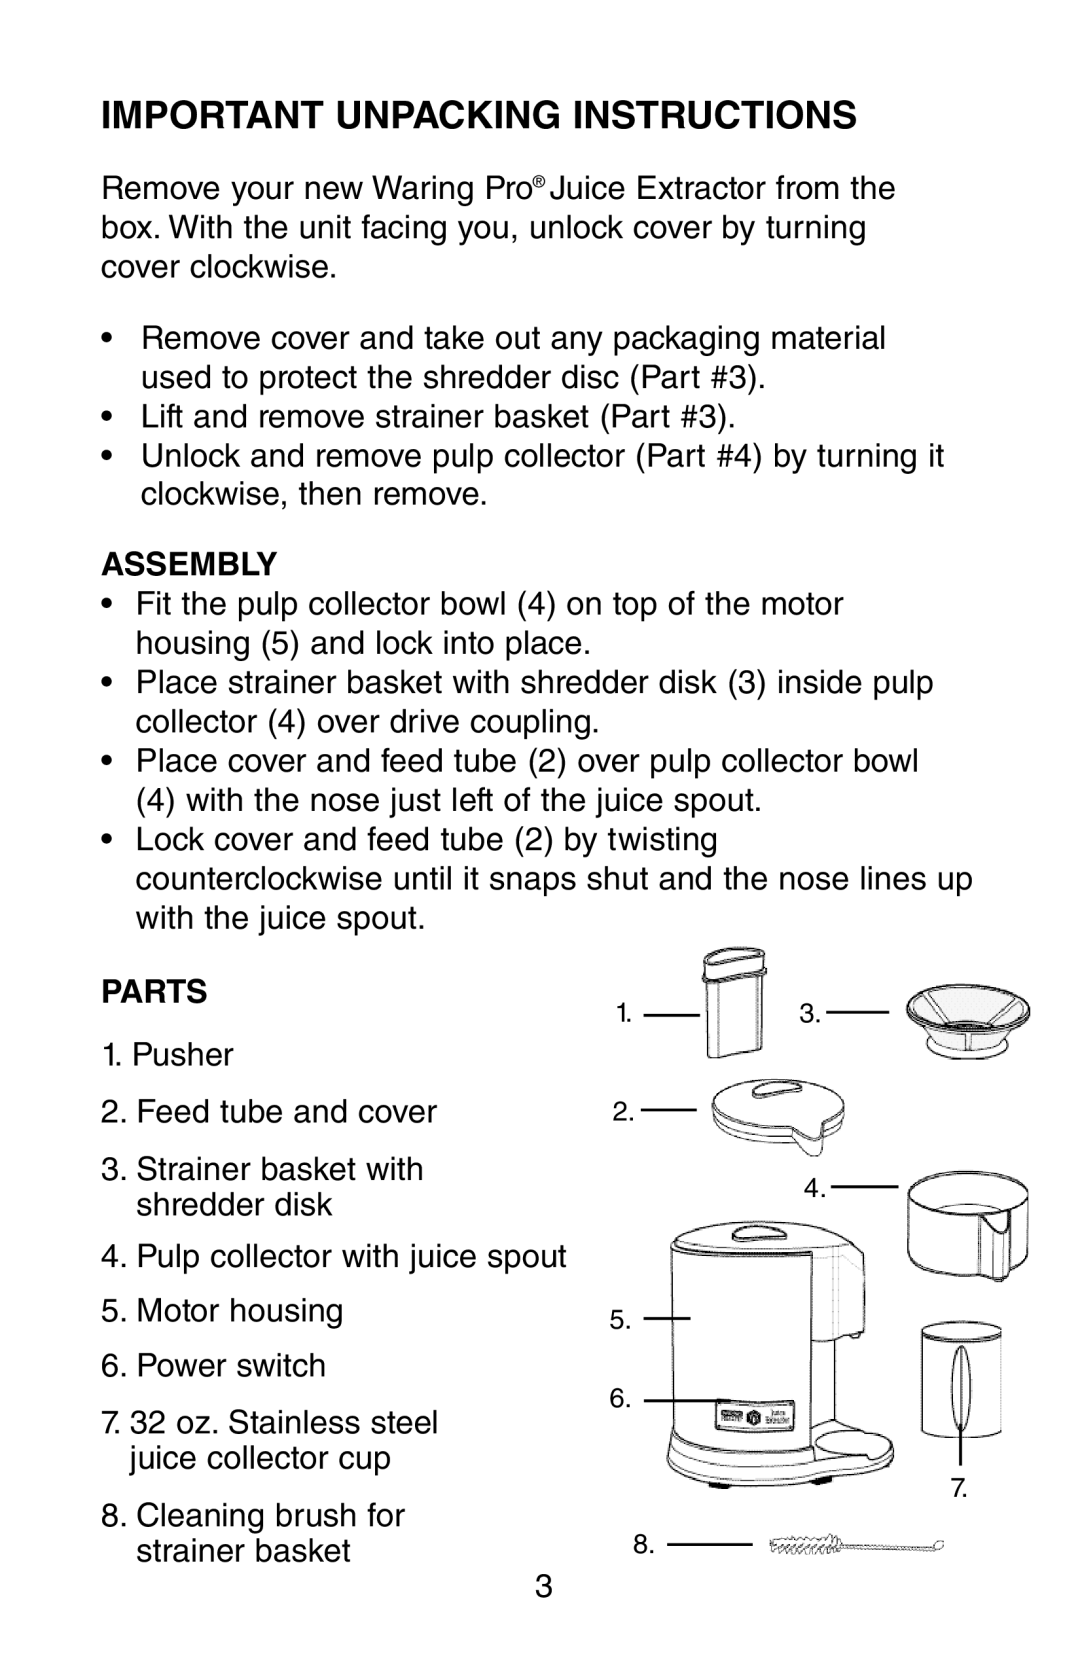 Waring JEX328 manual Important Unpacking Instructions, Assembly, Parts 